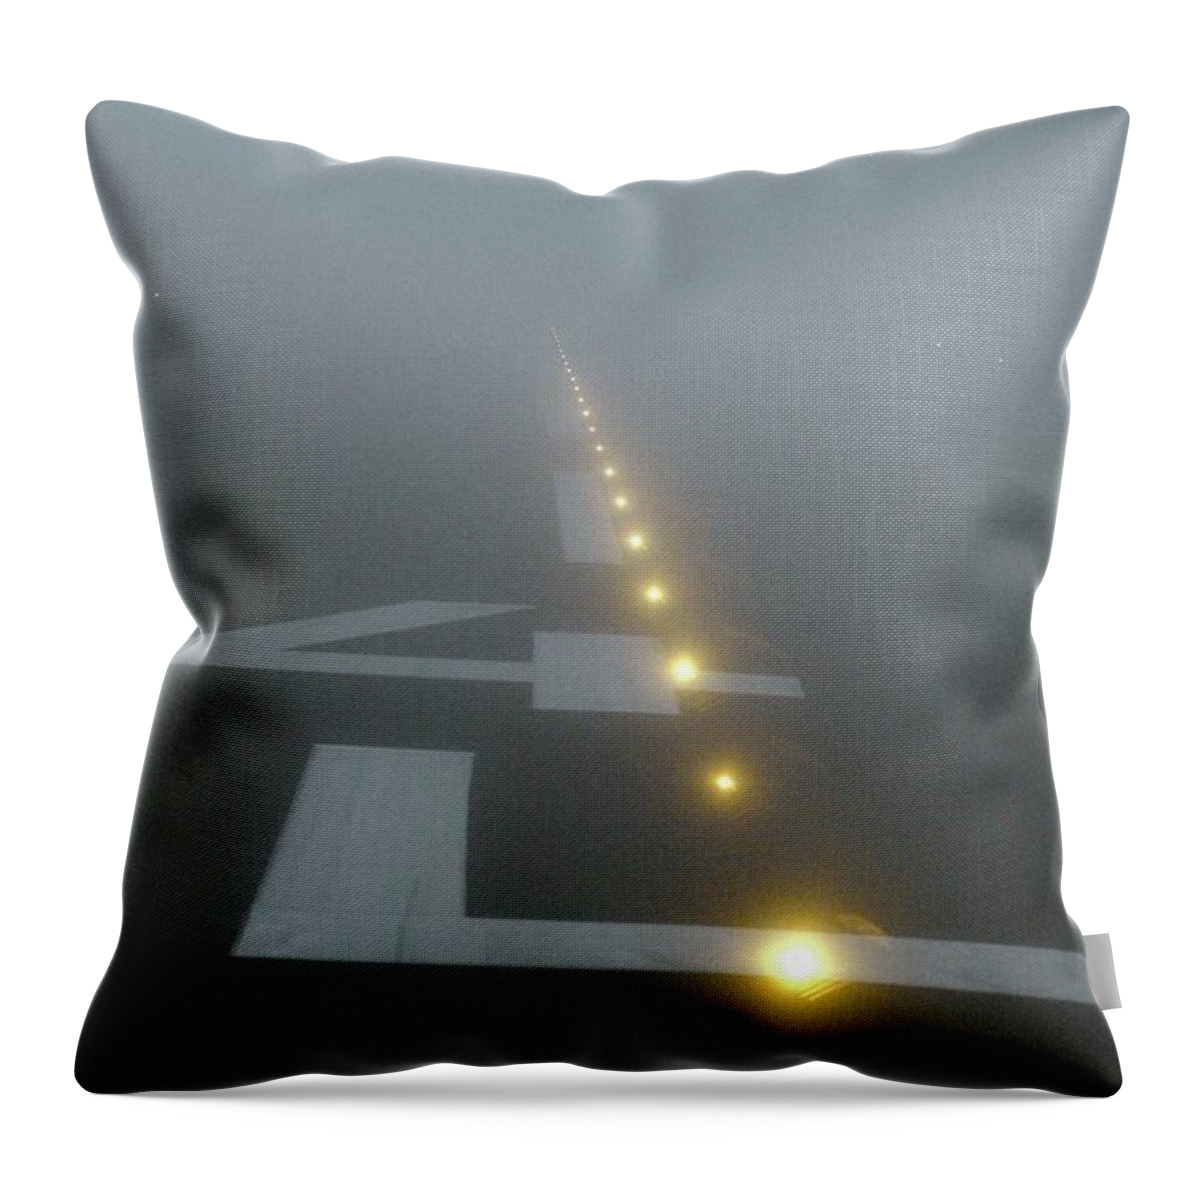 Dawn Throw Pillow featuring the photograph Runway 4l by Roger Kisby